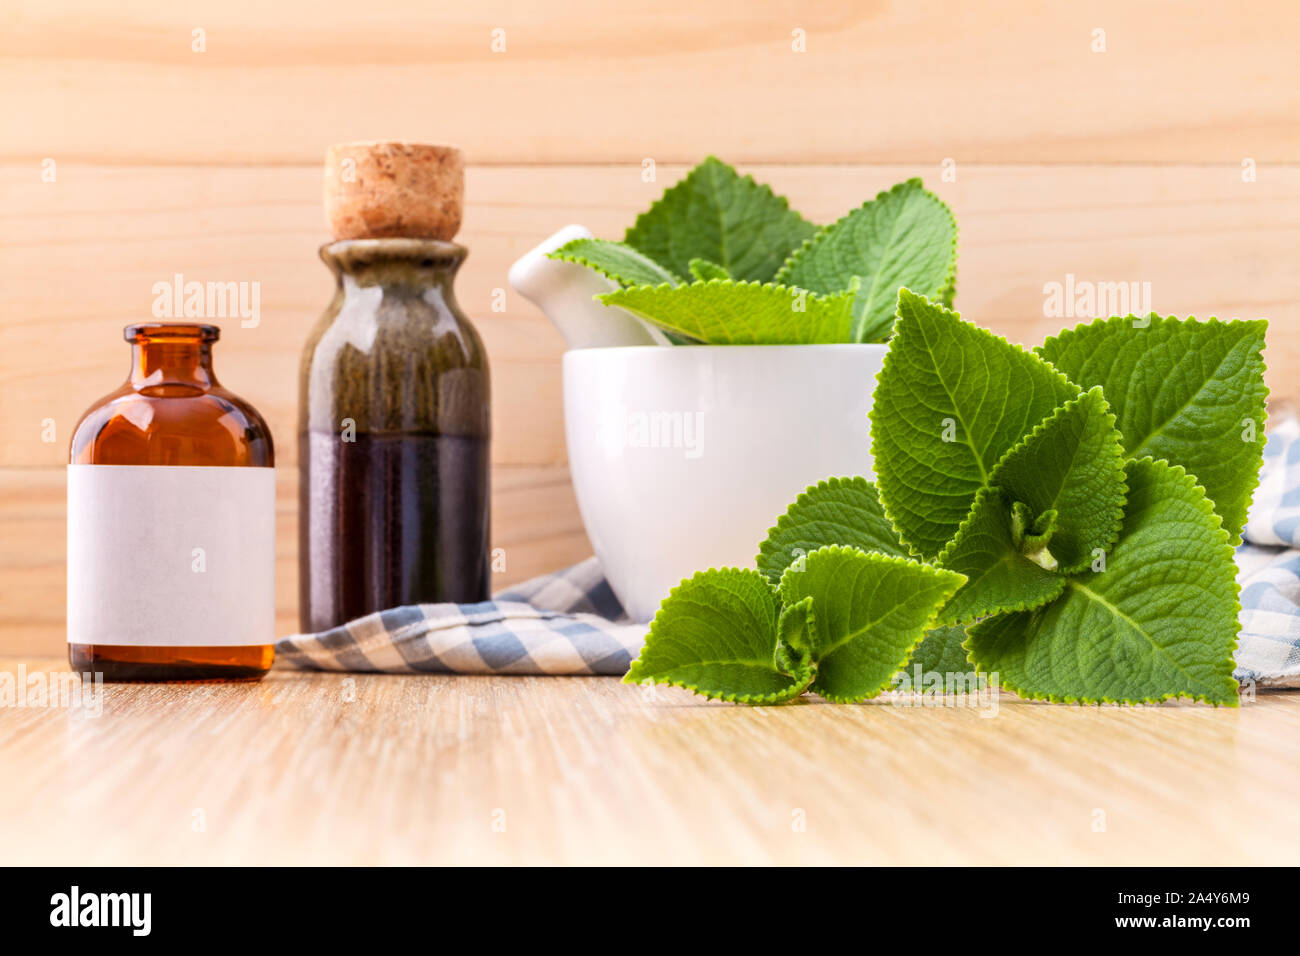 Country Borage,Indian Borage,Coleus amboinicus Lour with white mortar and essential extract oil on wooden background. Stock Photo